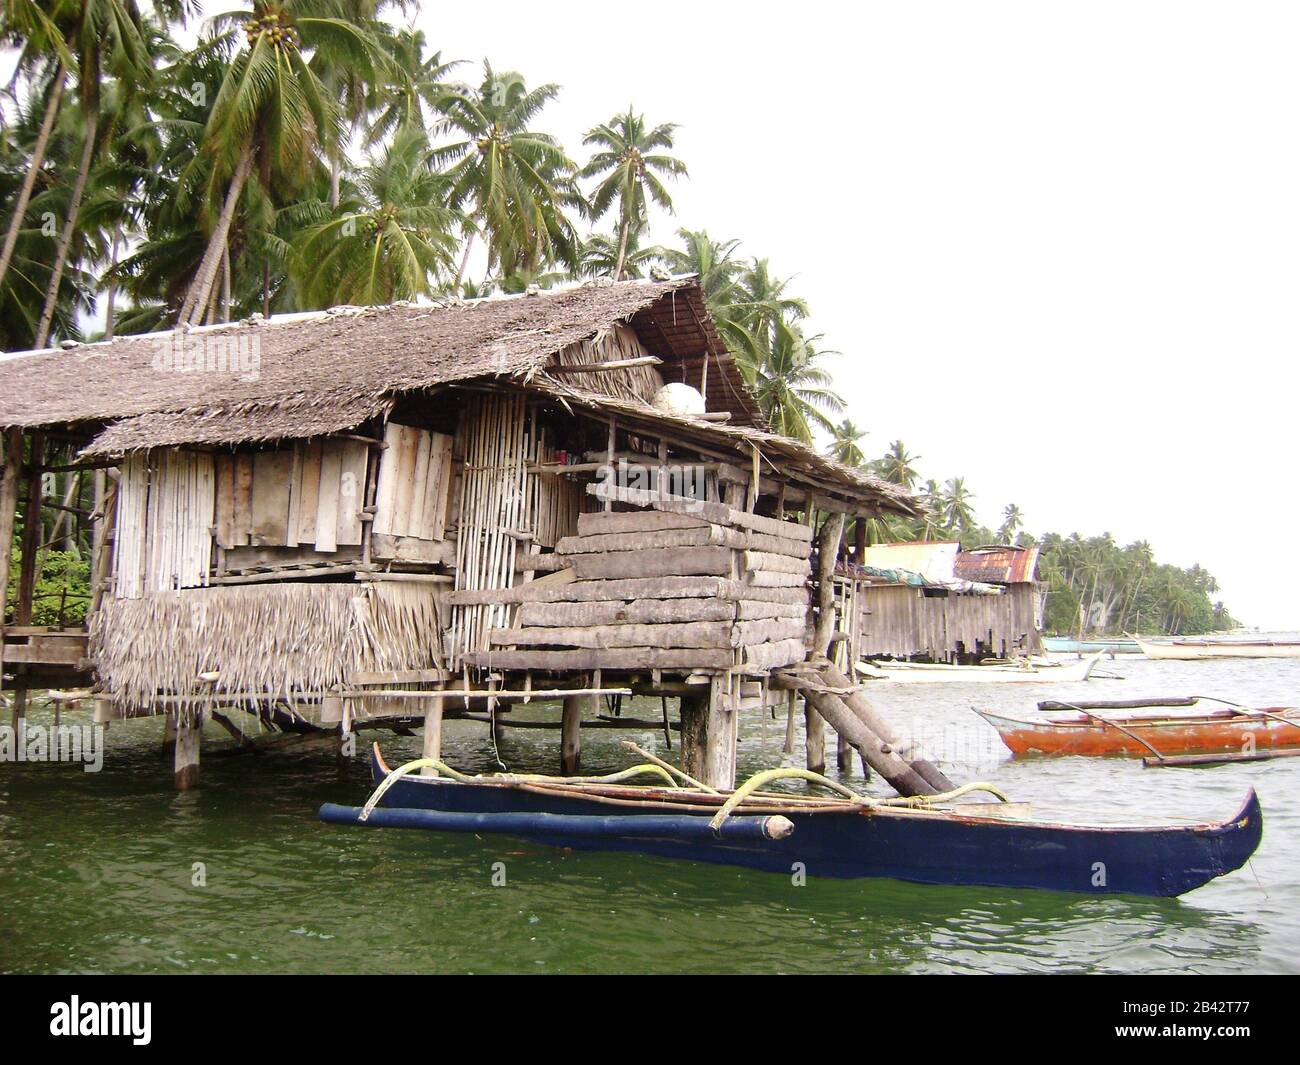 Medium close up of a houses on stilts with boats outside in a fishing village in Surigao del Sur, Philippines Stock Photo